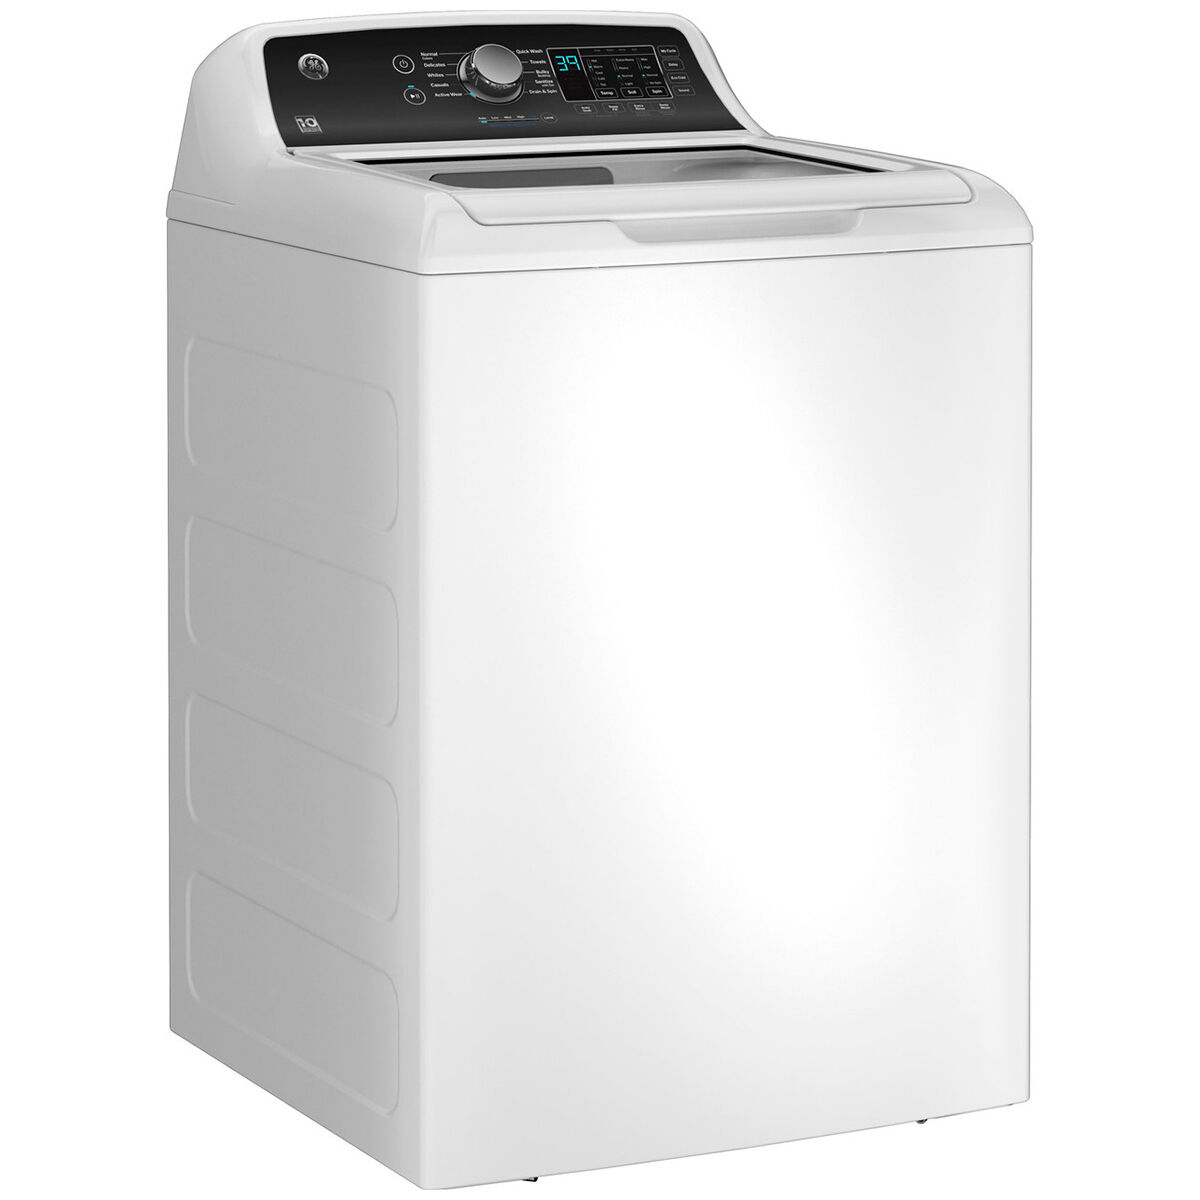 GE 27 in. 4.5 cu. ft. Top Load Washer with Agitator & Sanitize with Oxi -  White